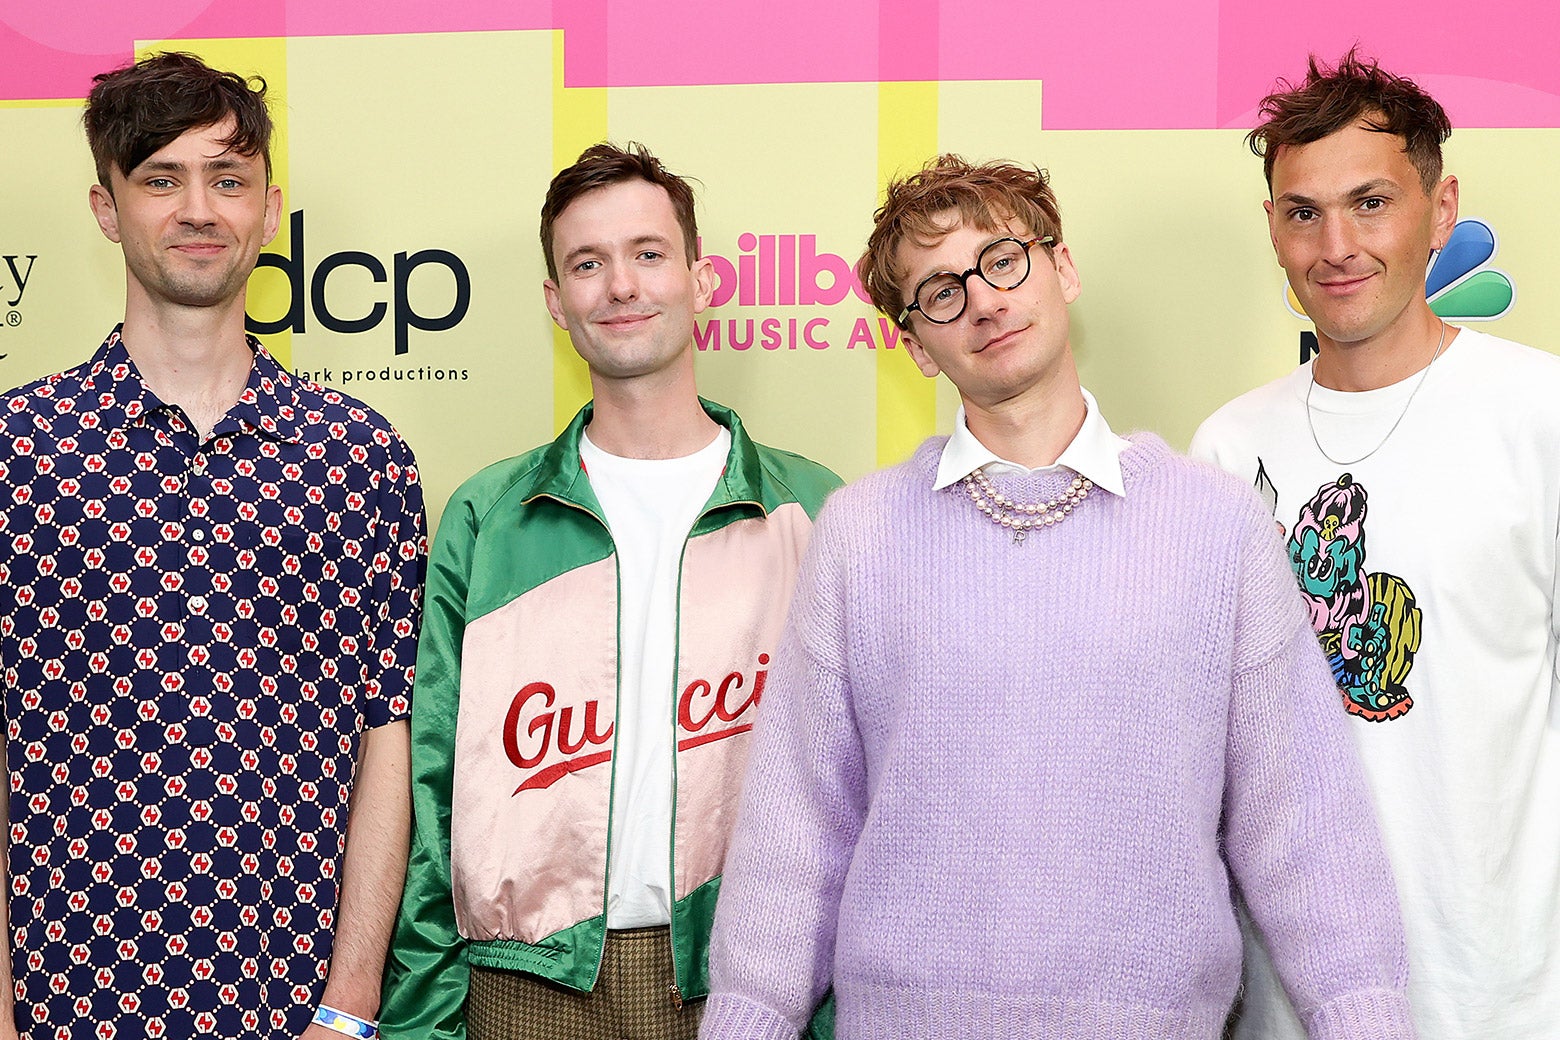 Heat Waves” by Glass Animals: The story of the No. 1 song that beat Encanto.